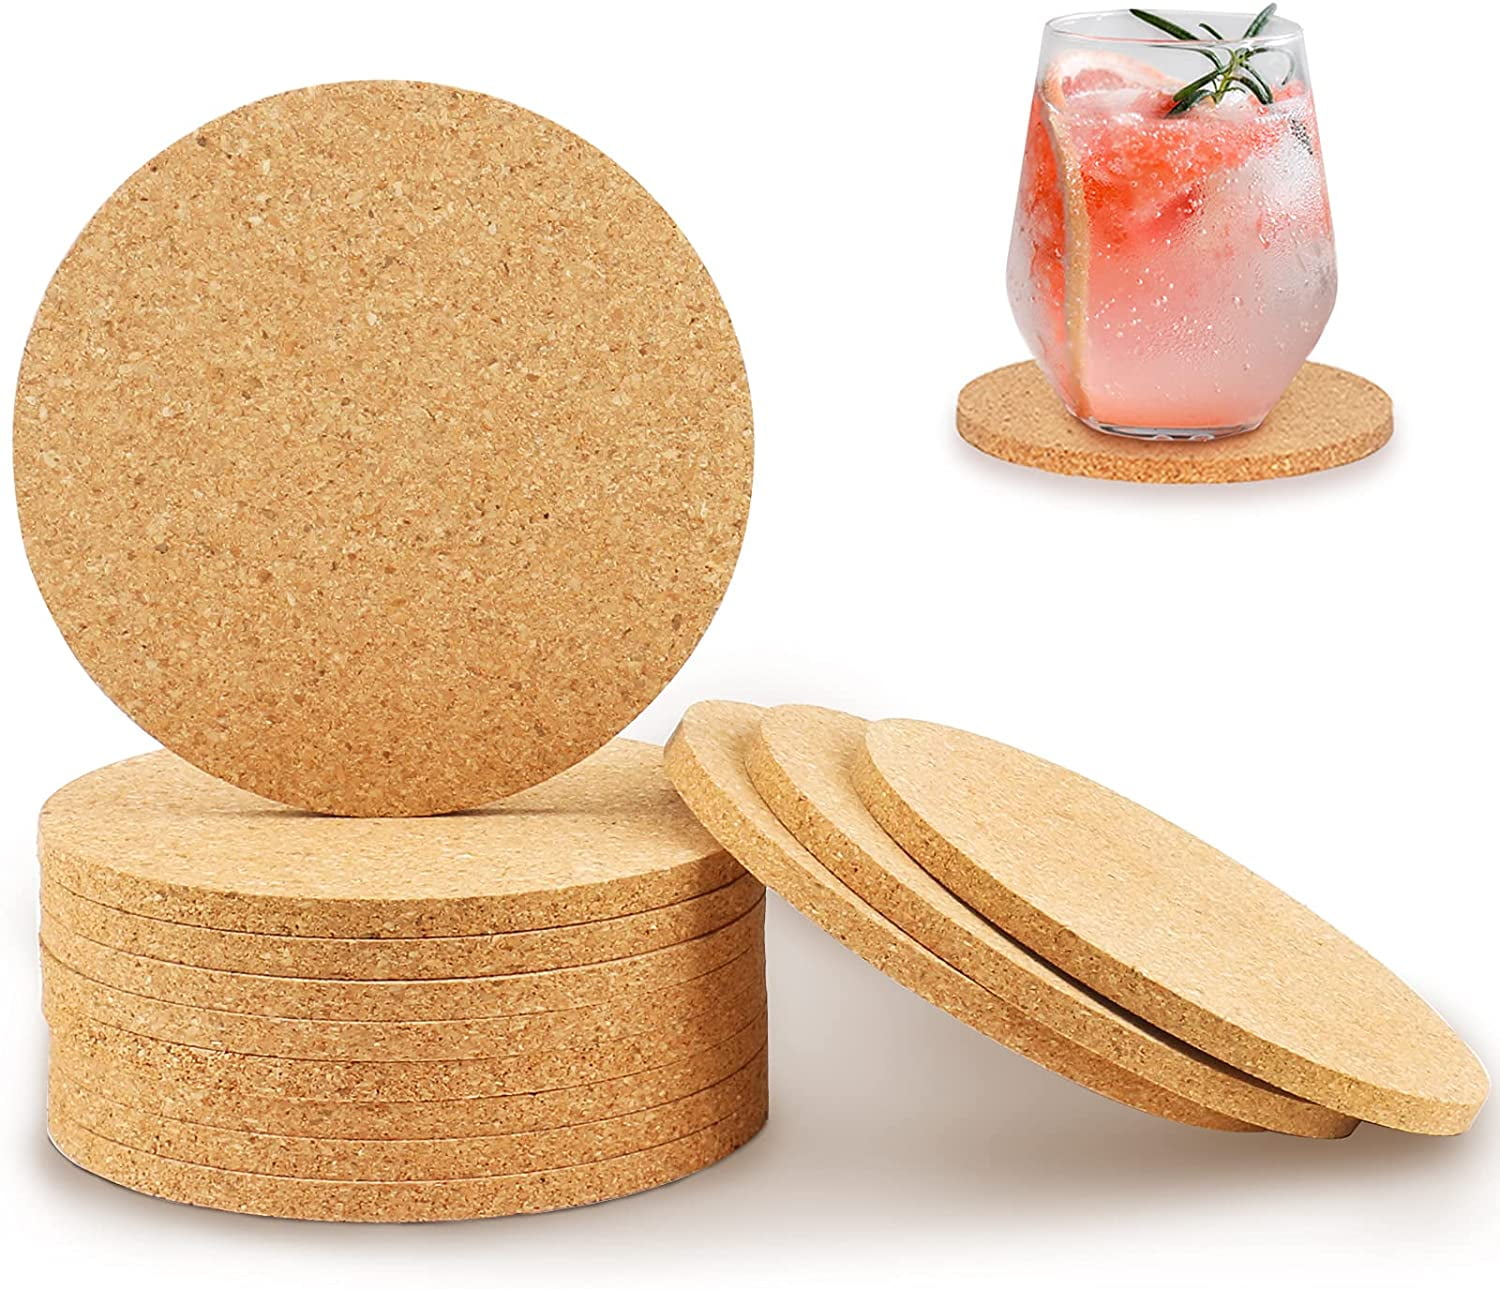 Cold Drinks Wine Glasses Cups Mugs Heat-Resistant Natural Cork Coasters 12-Piece Set for Housewarming Gifts Cork Coasters for Drinks Tabletop Protection Living Room Decor